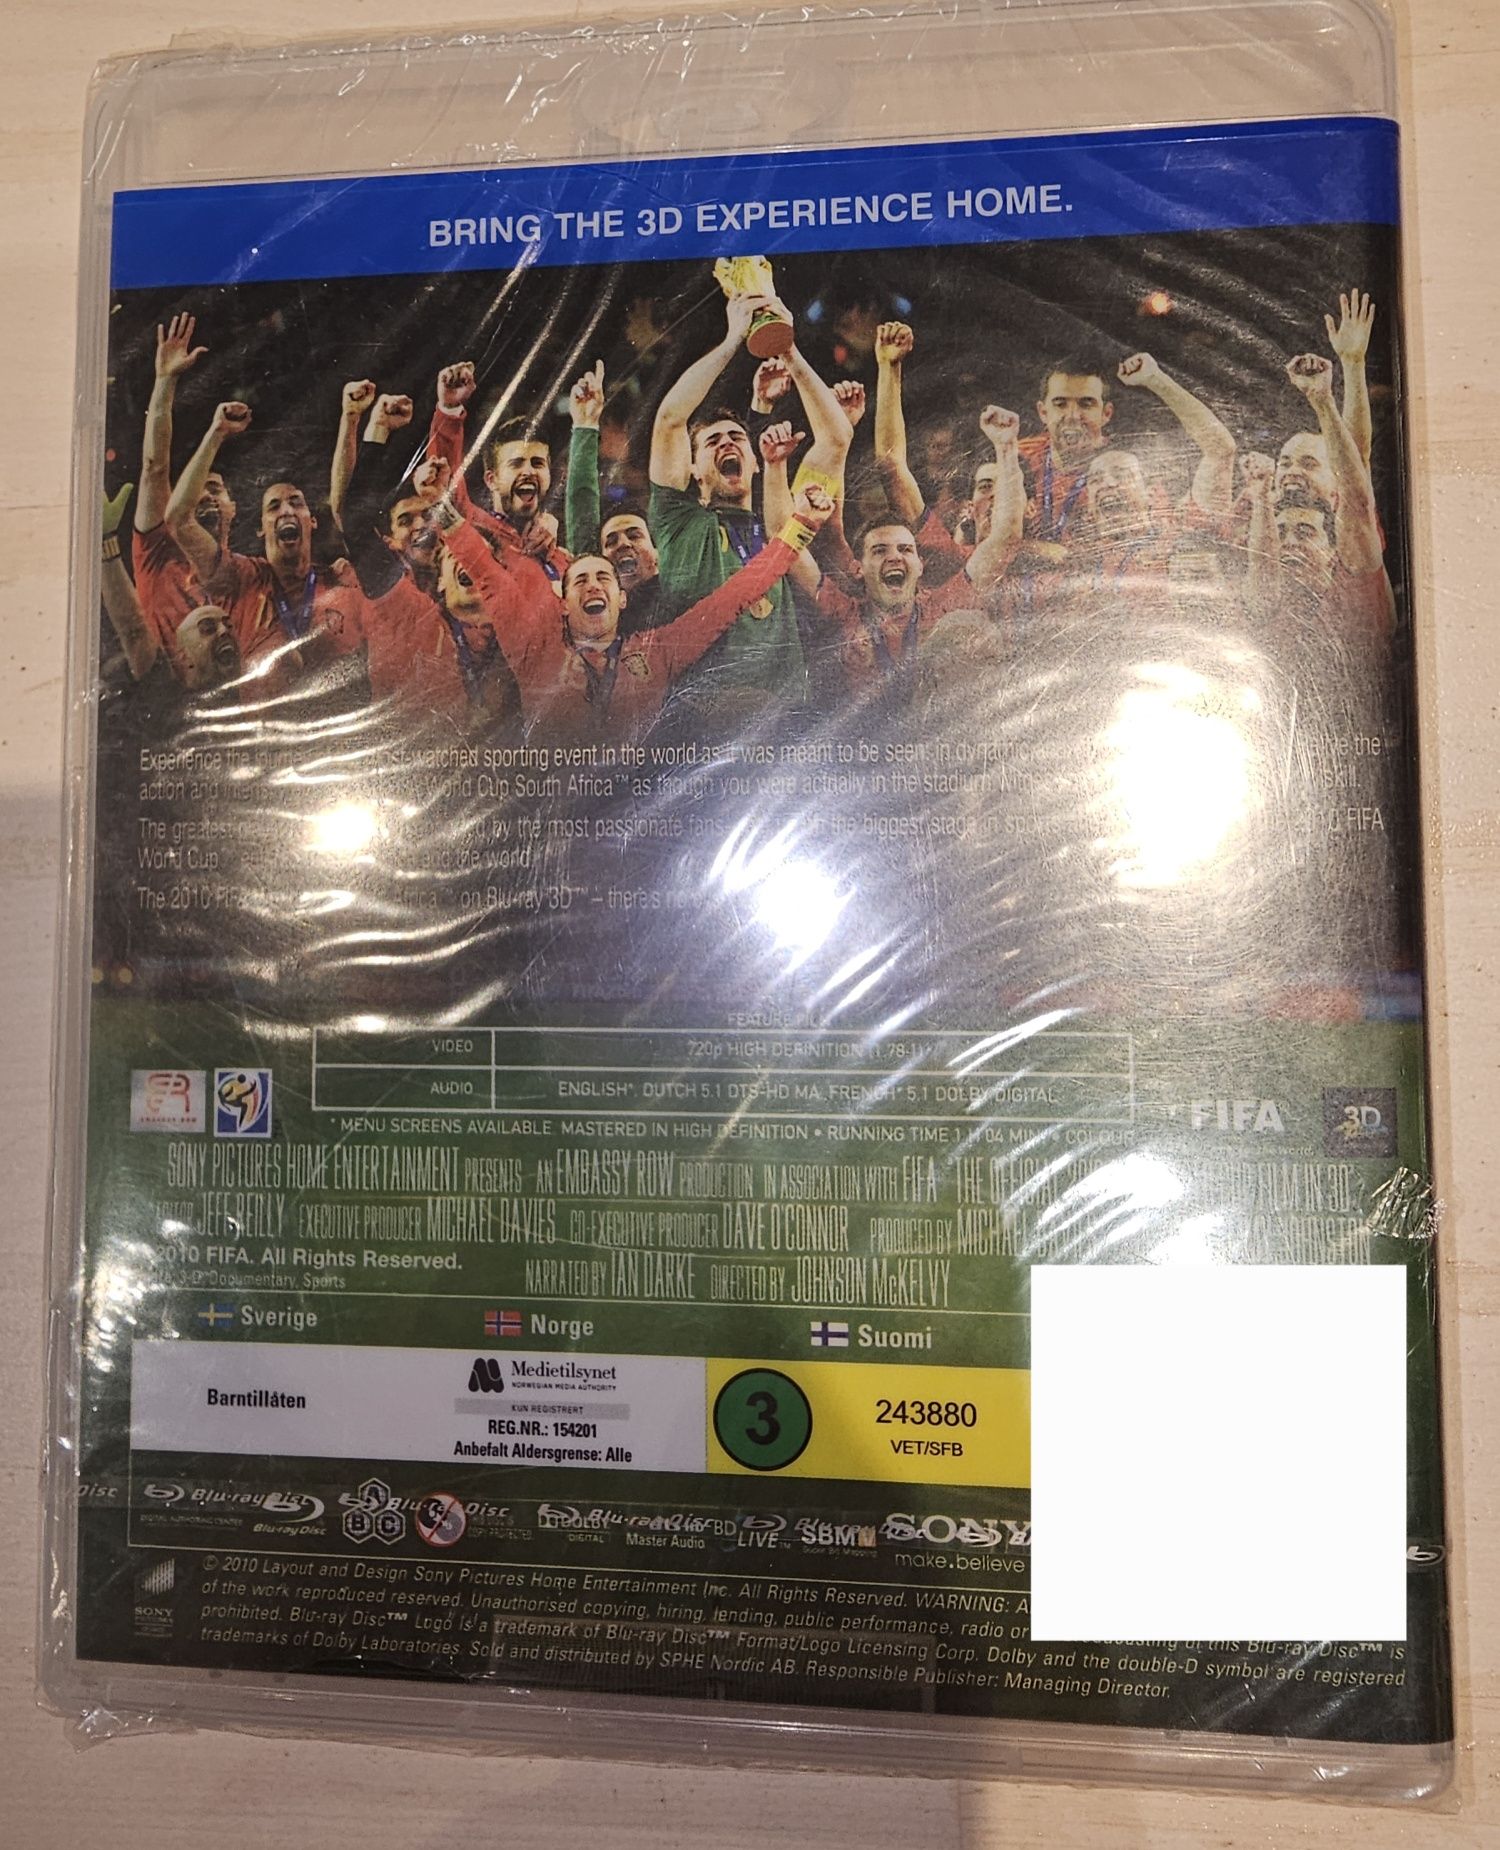 2010 FIFA World Cup blu ray 3D nowy w folii ANG